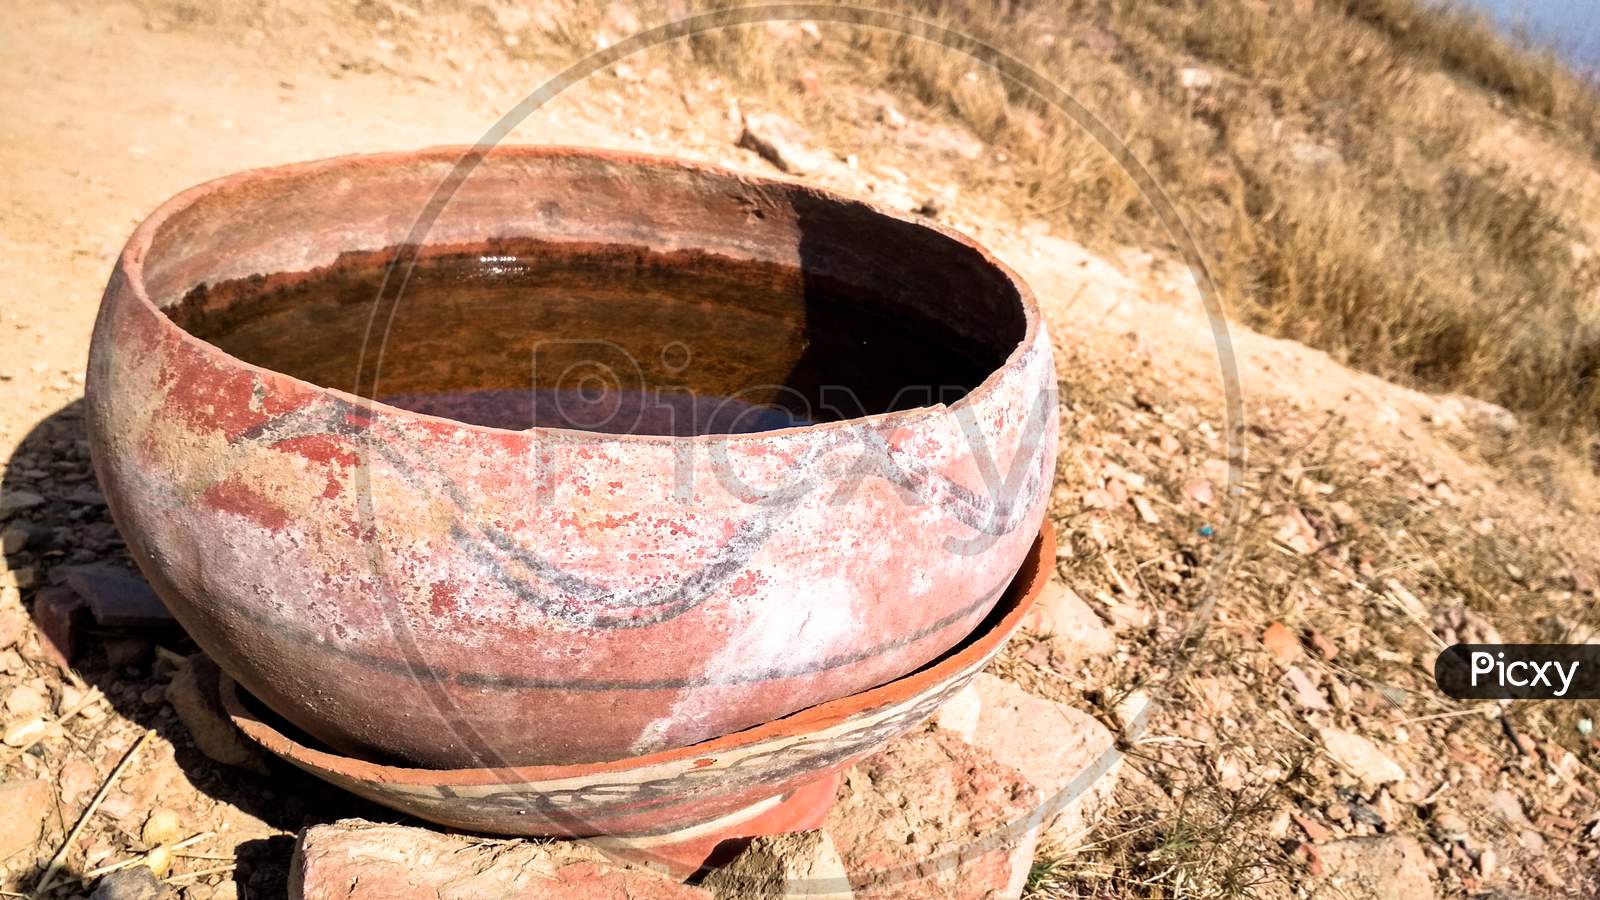 Water In A Clay Pot For Birds To Drink In Summer Weather